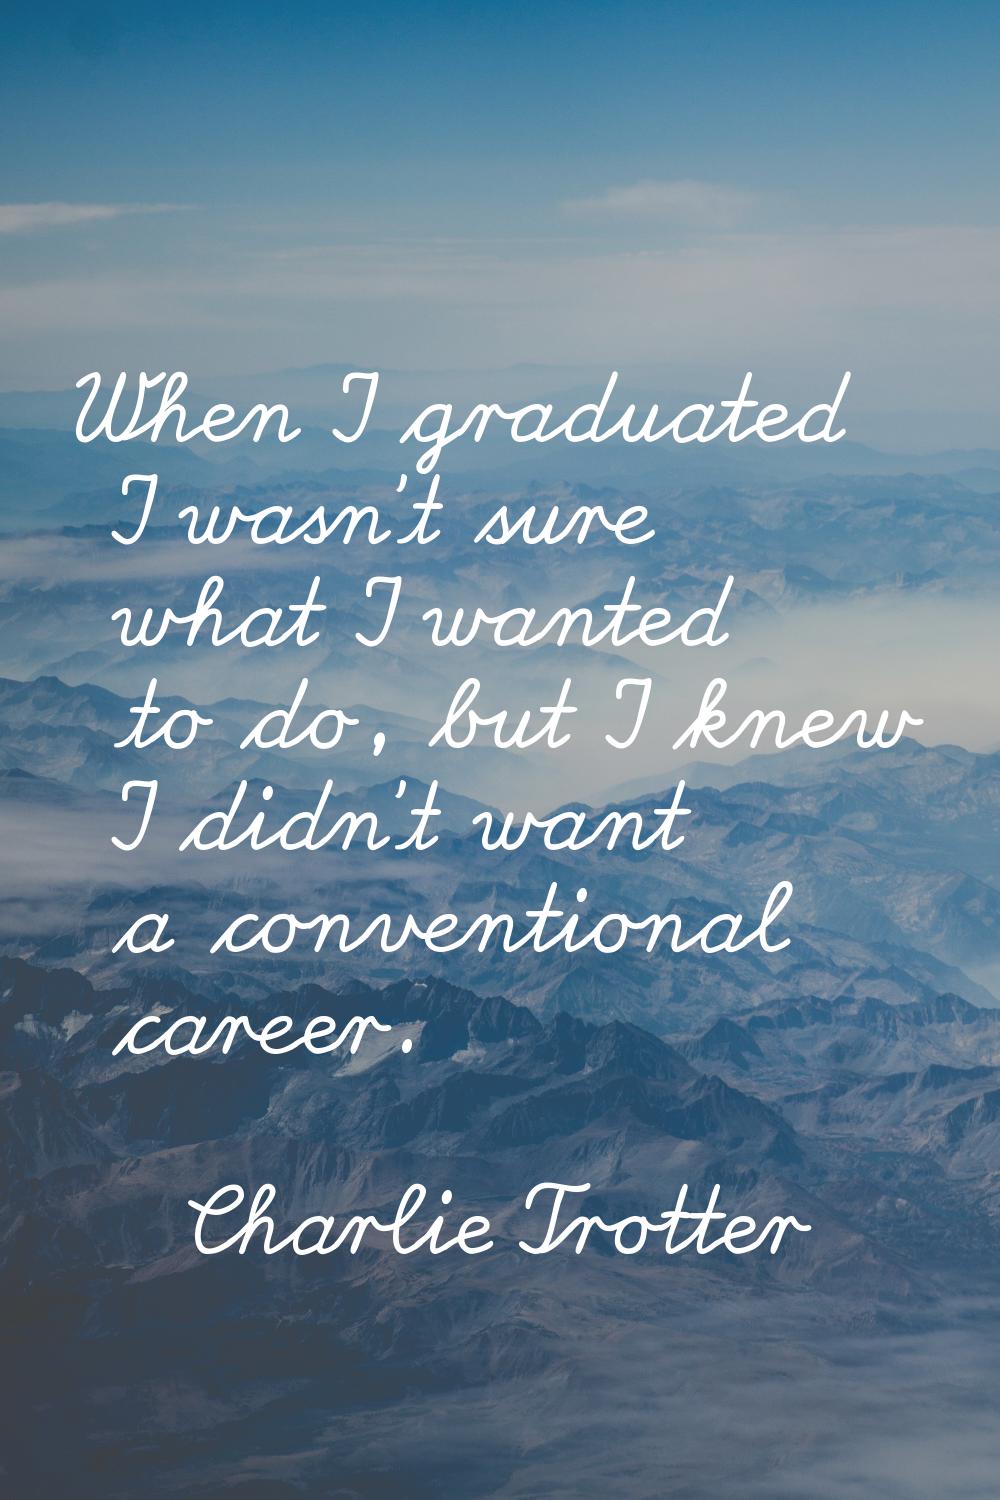 When I graduated I wasn't sure what I wanted to do, but I knew I didn't want a conventional career.